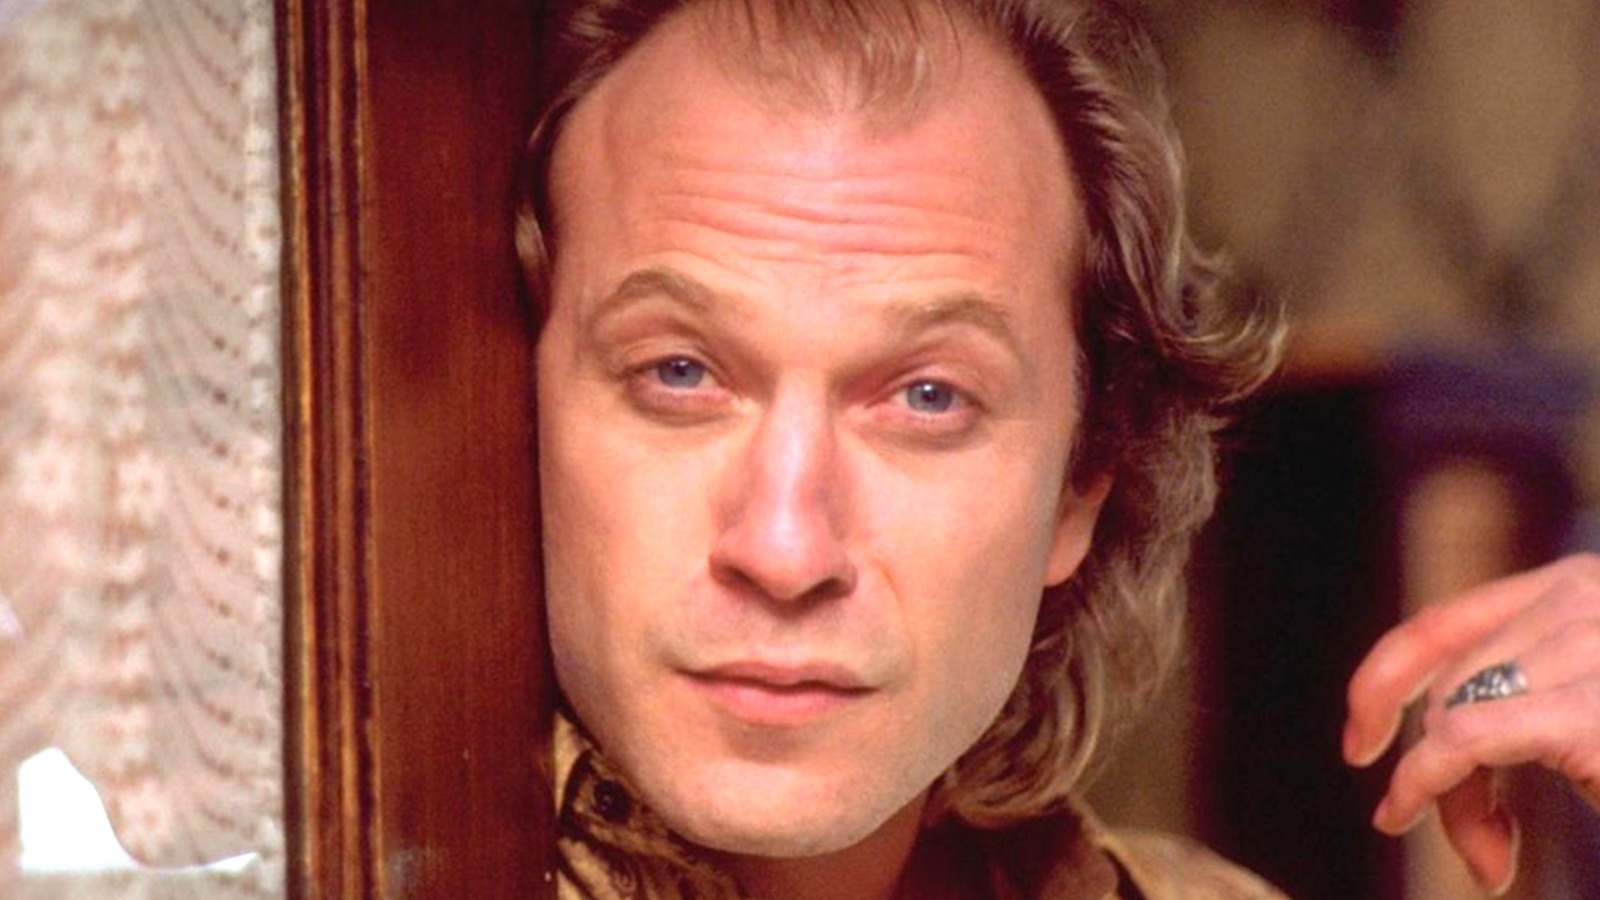 "The Silence of the Lambs" includes an iconic Buffalo Bil...